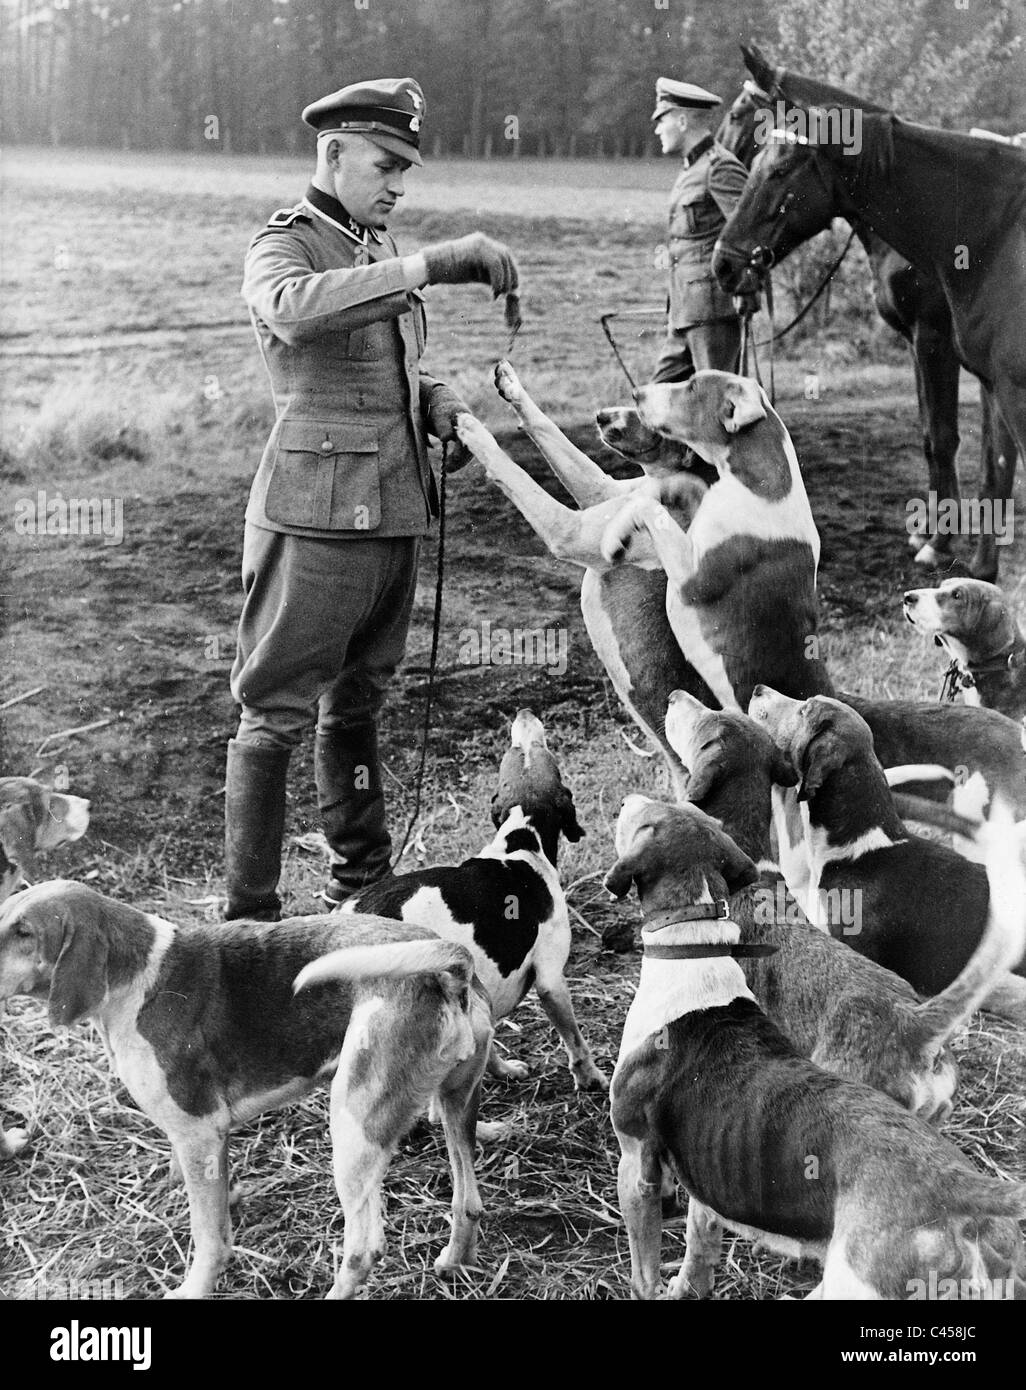 Mounted police with hunting dogs, 1938 Stock Photo